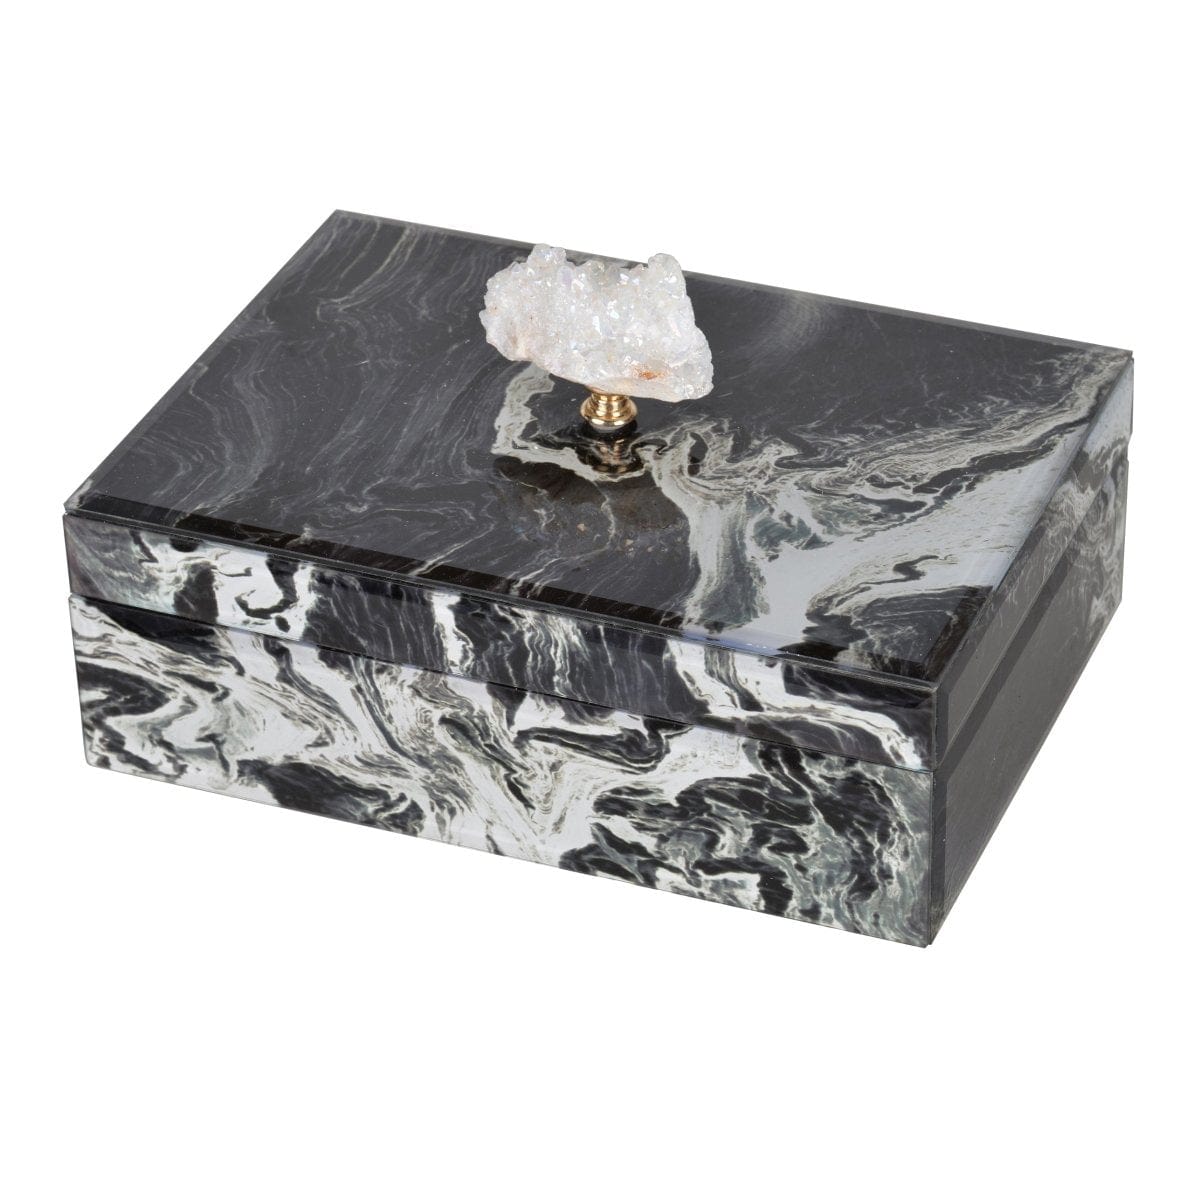 AB-41374  BLACK MARBLED JEWELRY CASE, LARGE picket and rail